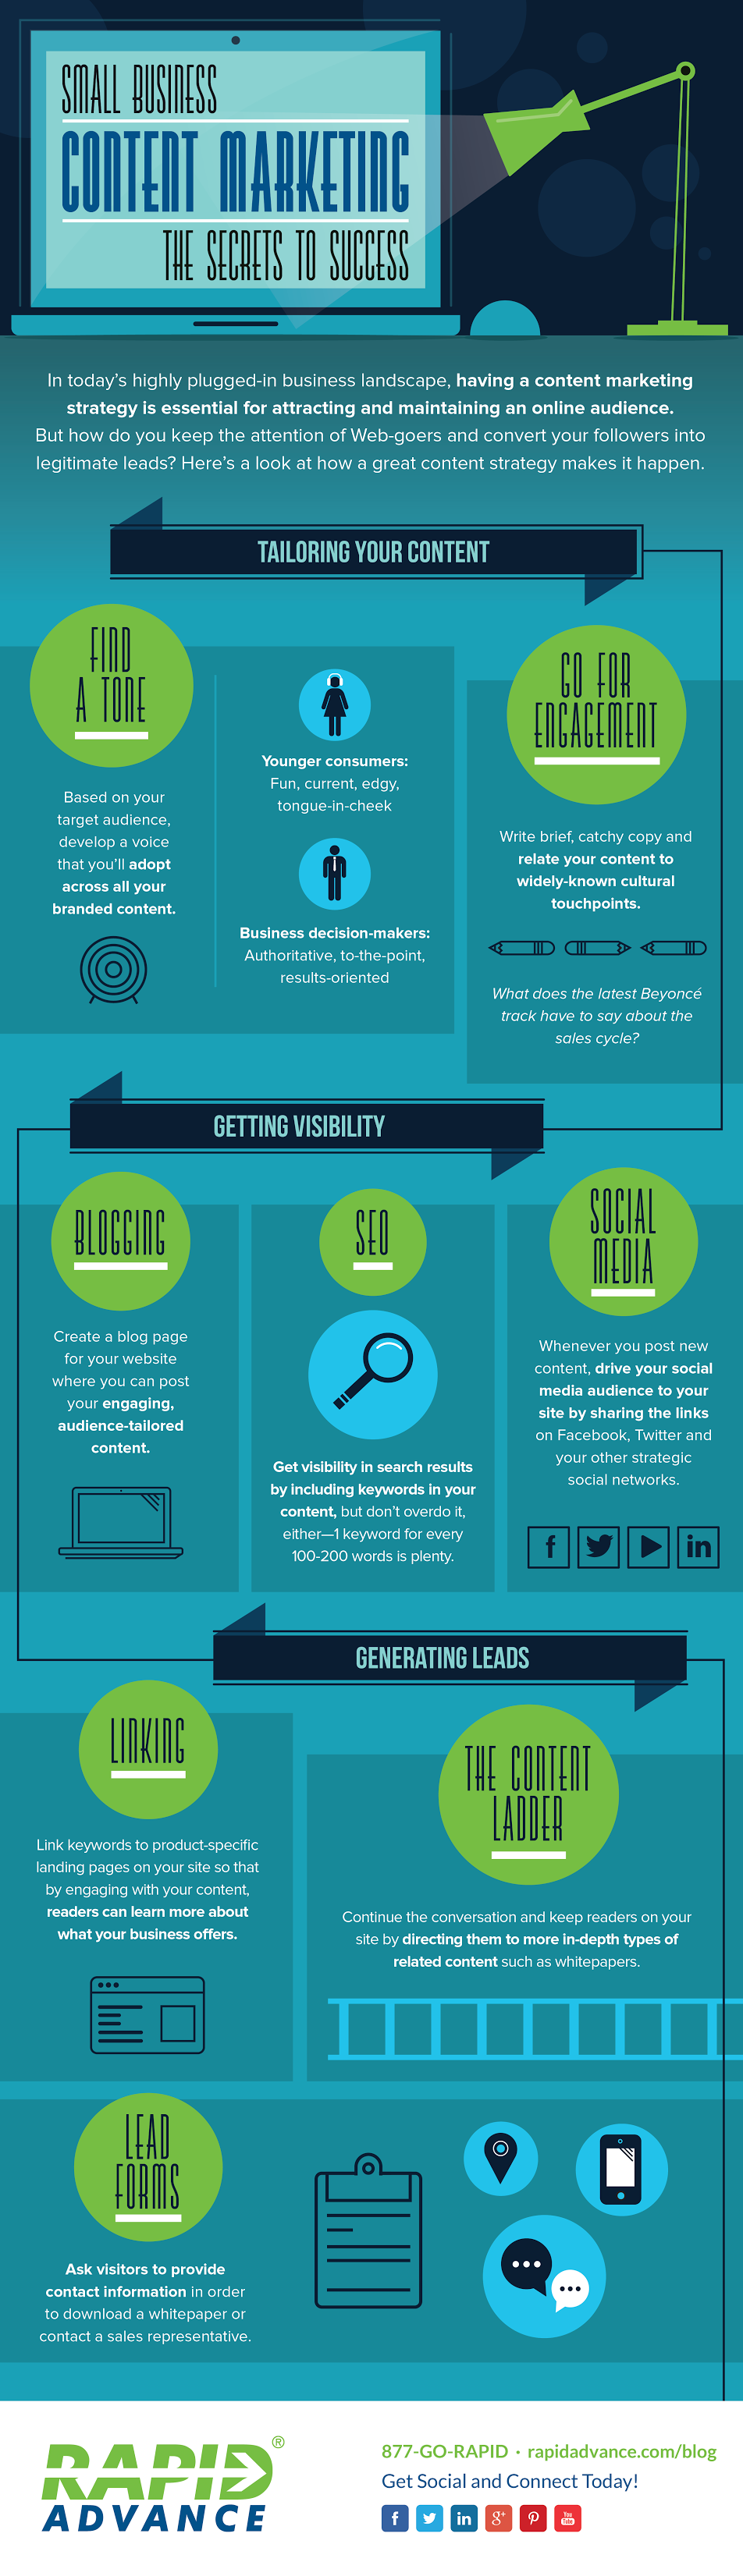 The Secrets To Small Business Content Marketing Success - #infographic